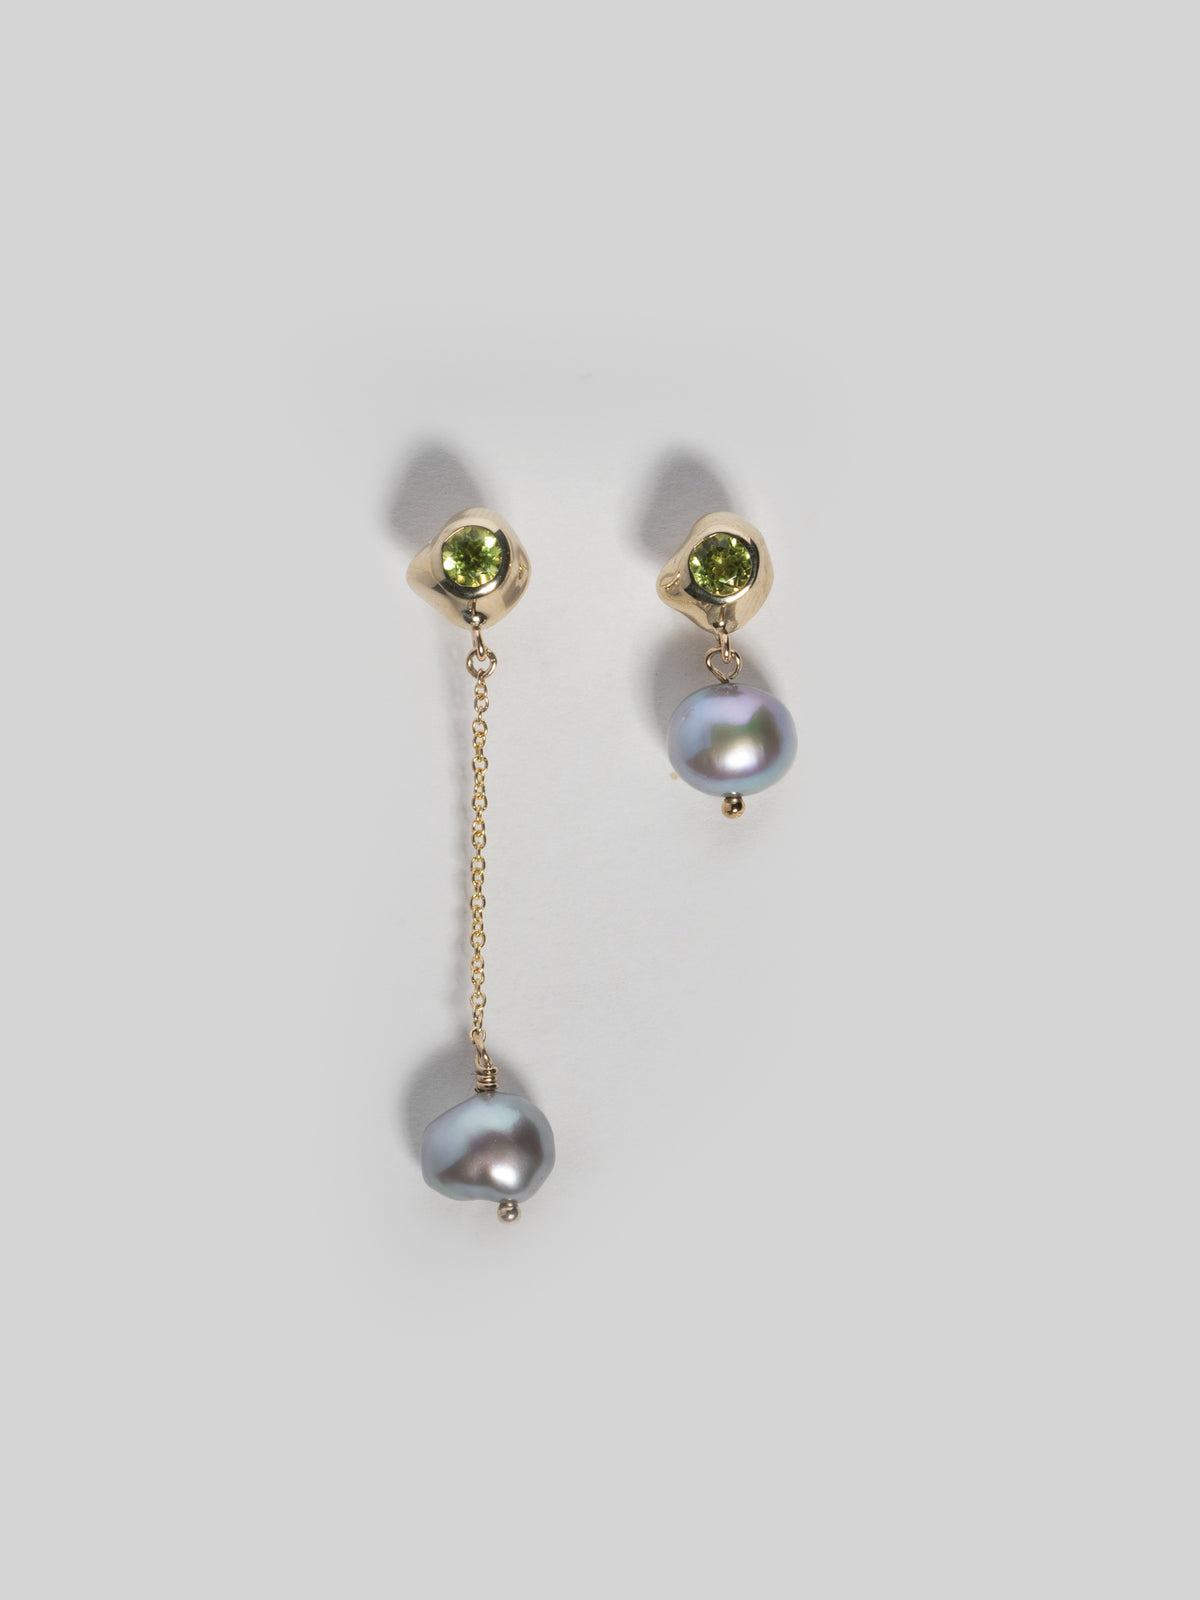 Product image of FARIS KIRA Drops in gold-plated bronze with peridot and grey freshwater pearls